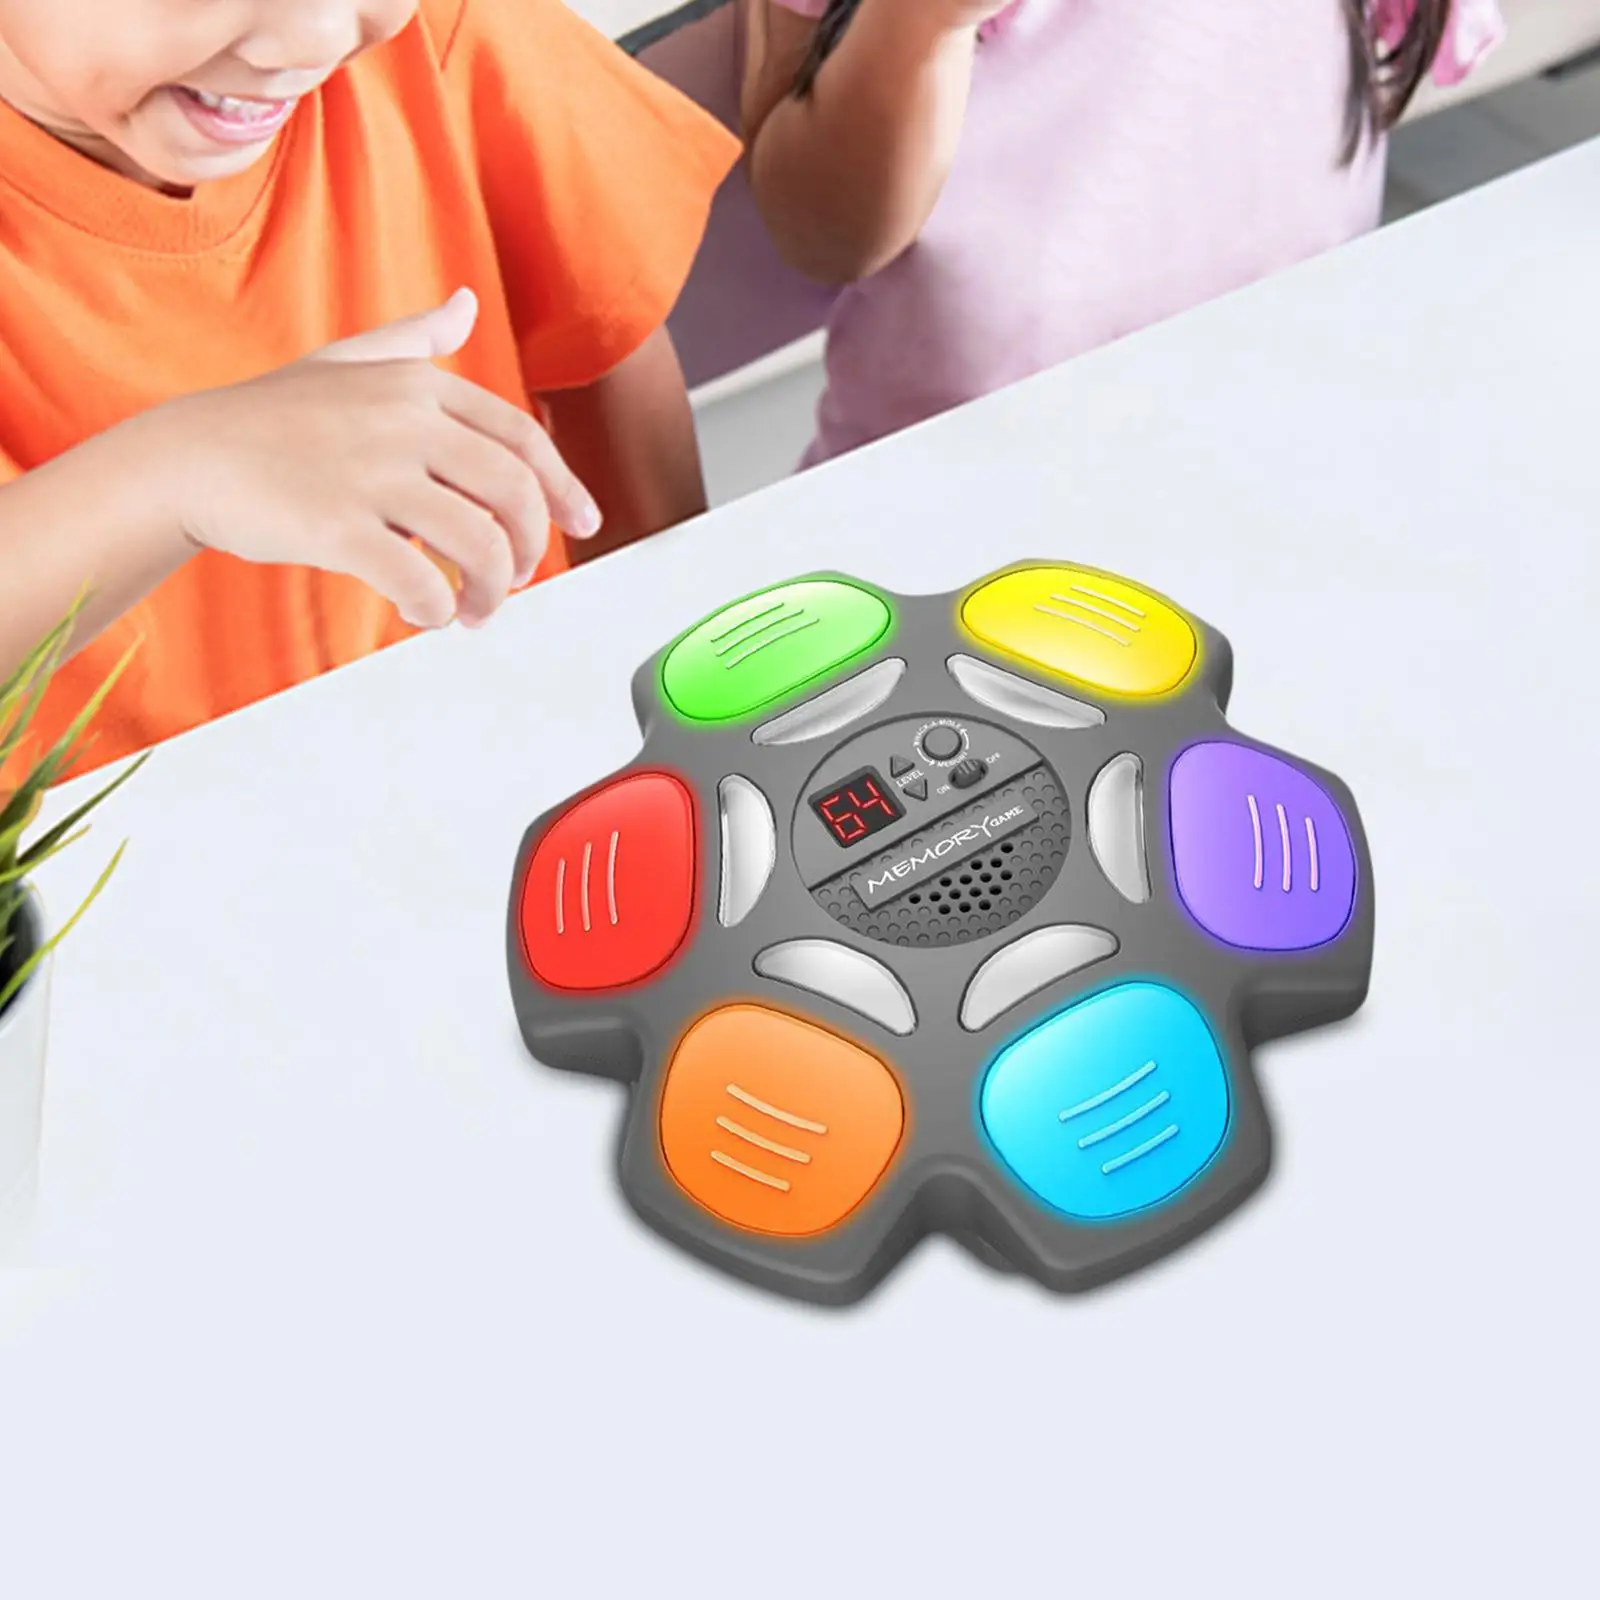 Pocket Memory Maze Game Training Hand Brain Coordination Electronic Memory Game Kids Ages 6+